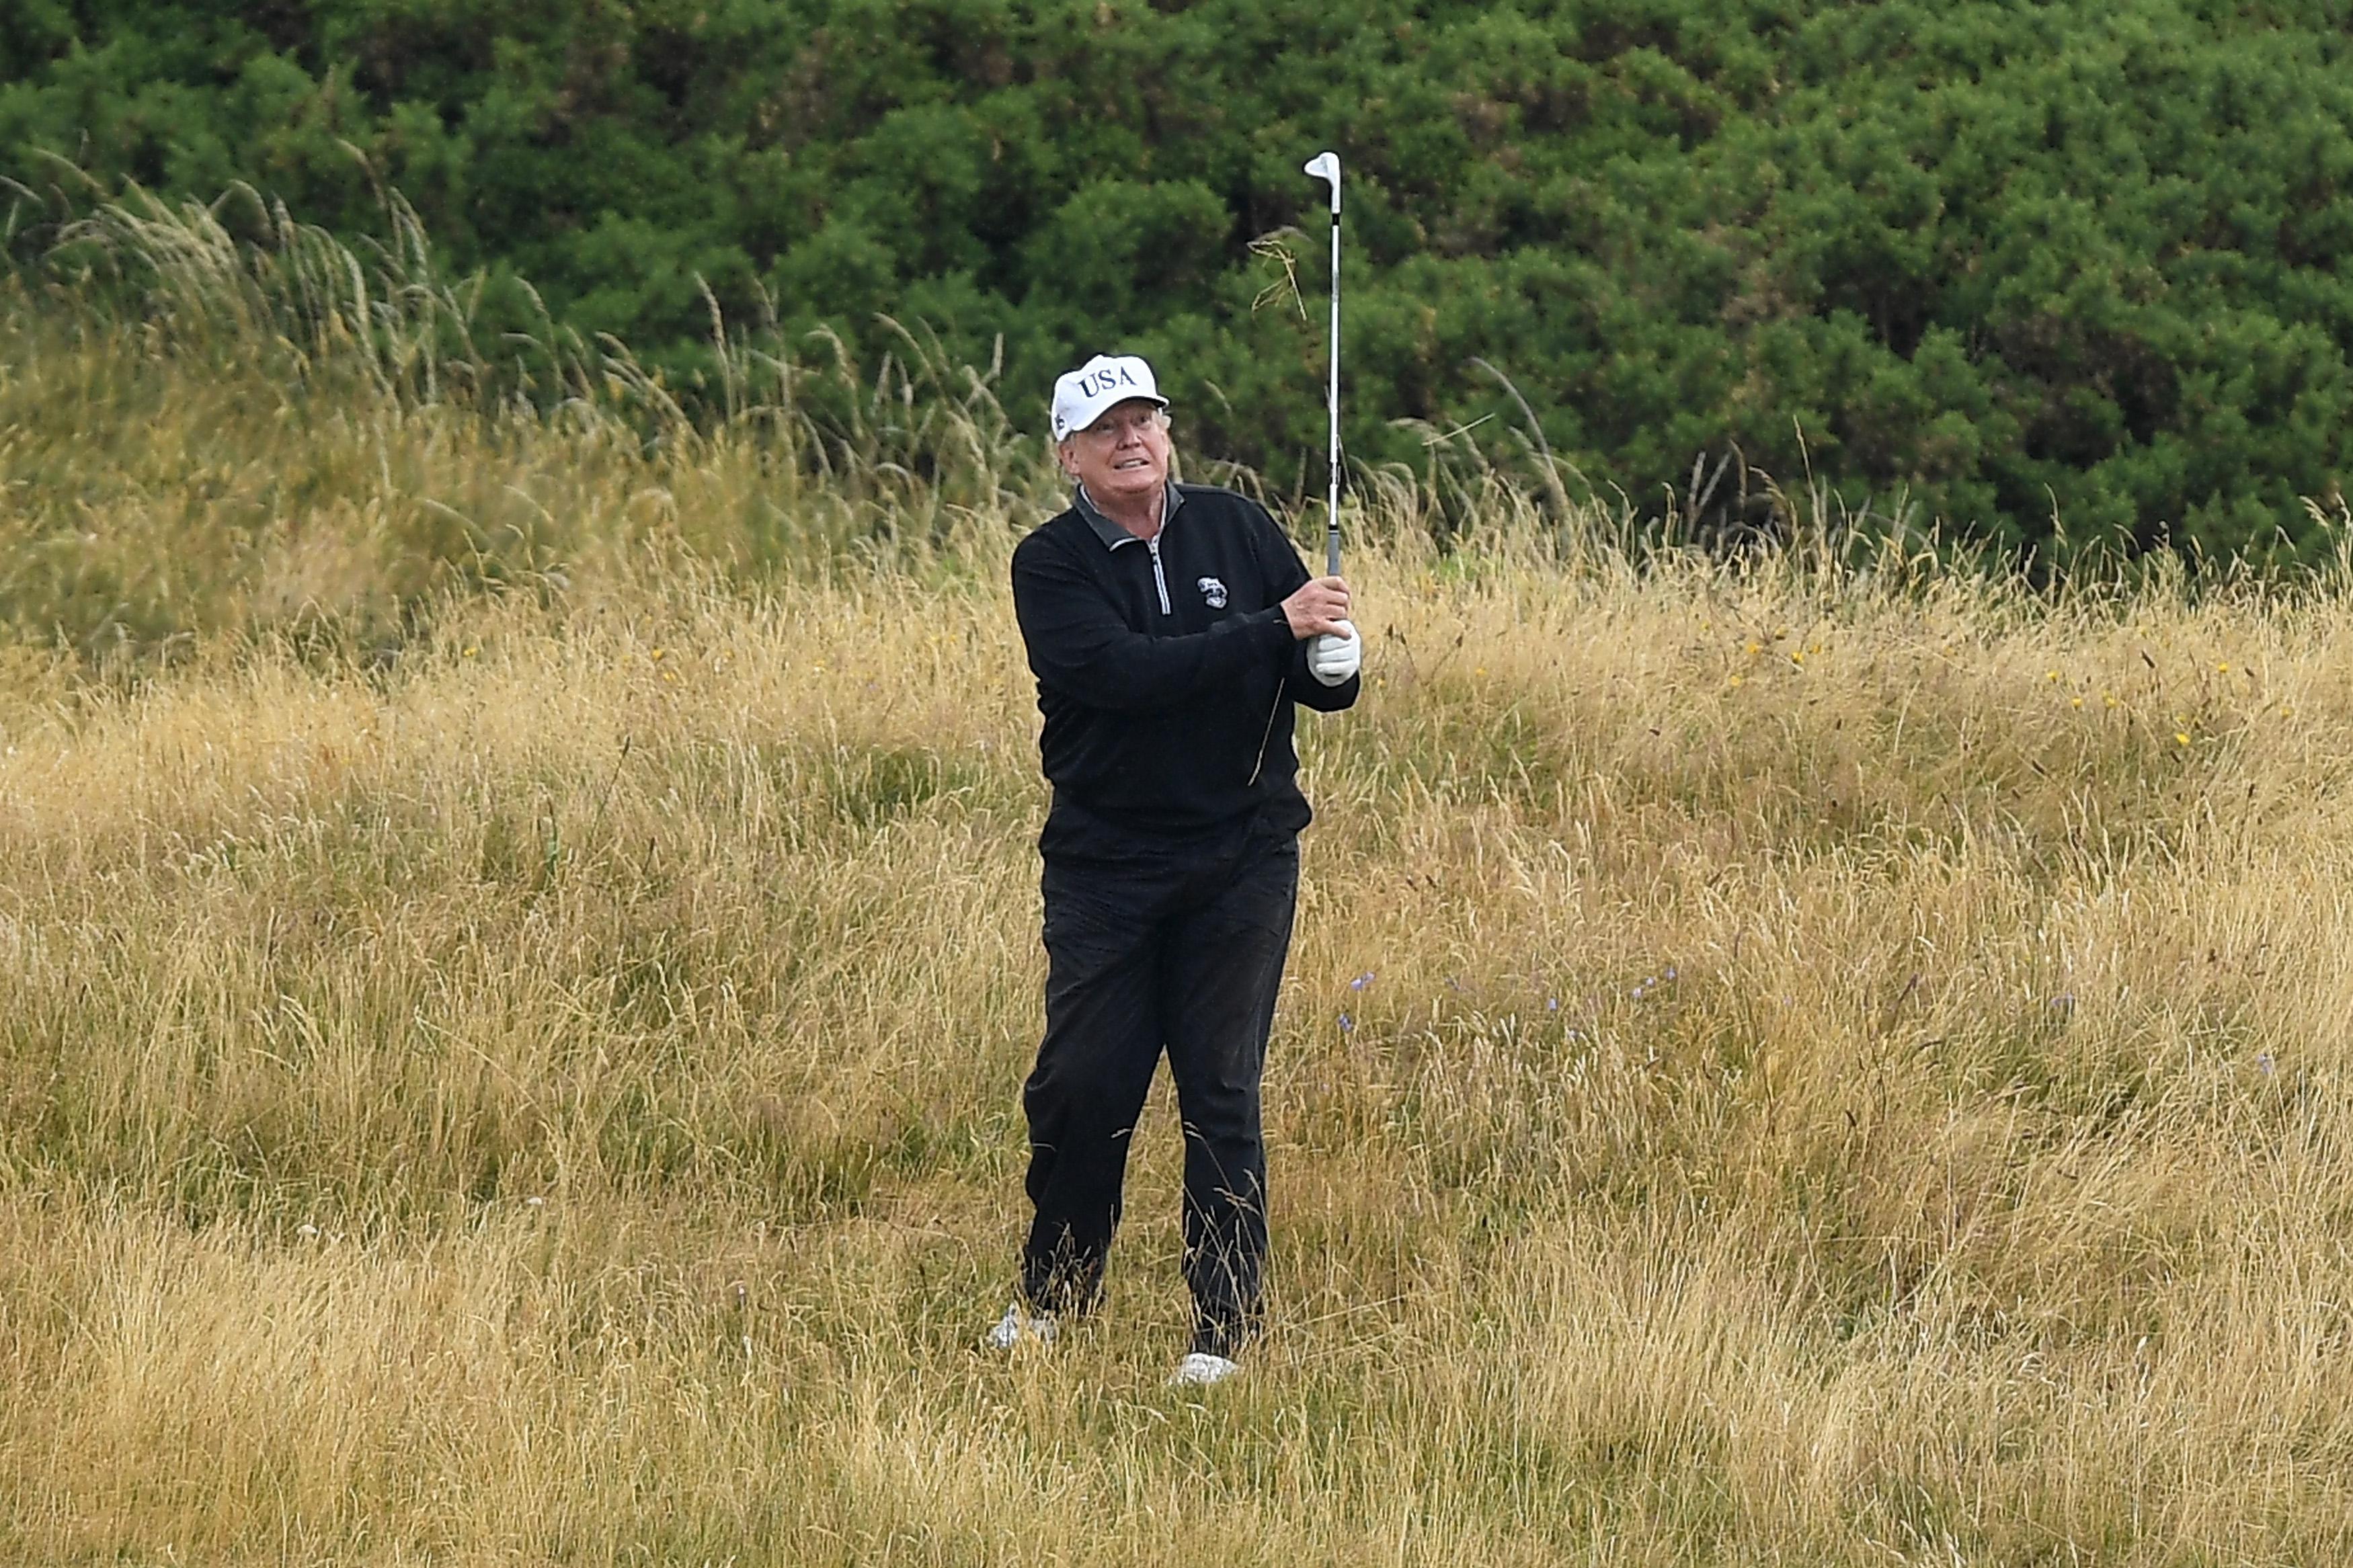 President Trump plays a round of golf at Trump Turnberry Luxury Collection Resort during his first official visit to the U.K. on July 15, 2018.